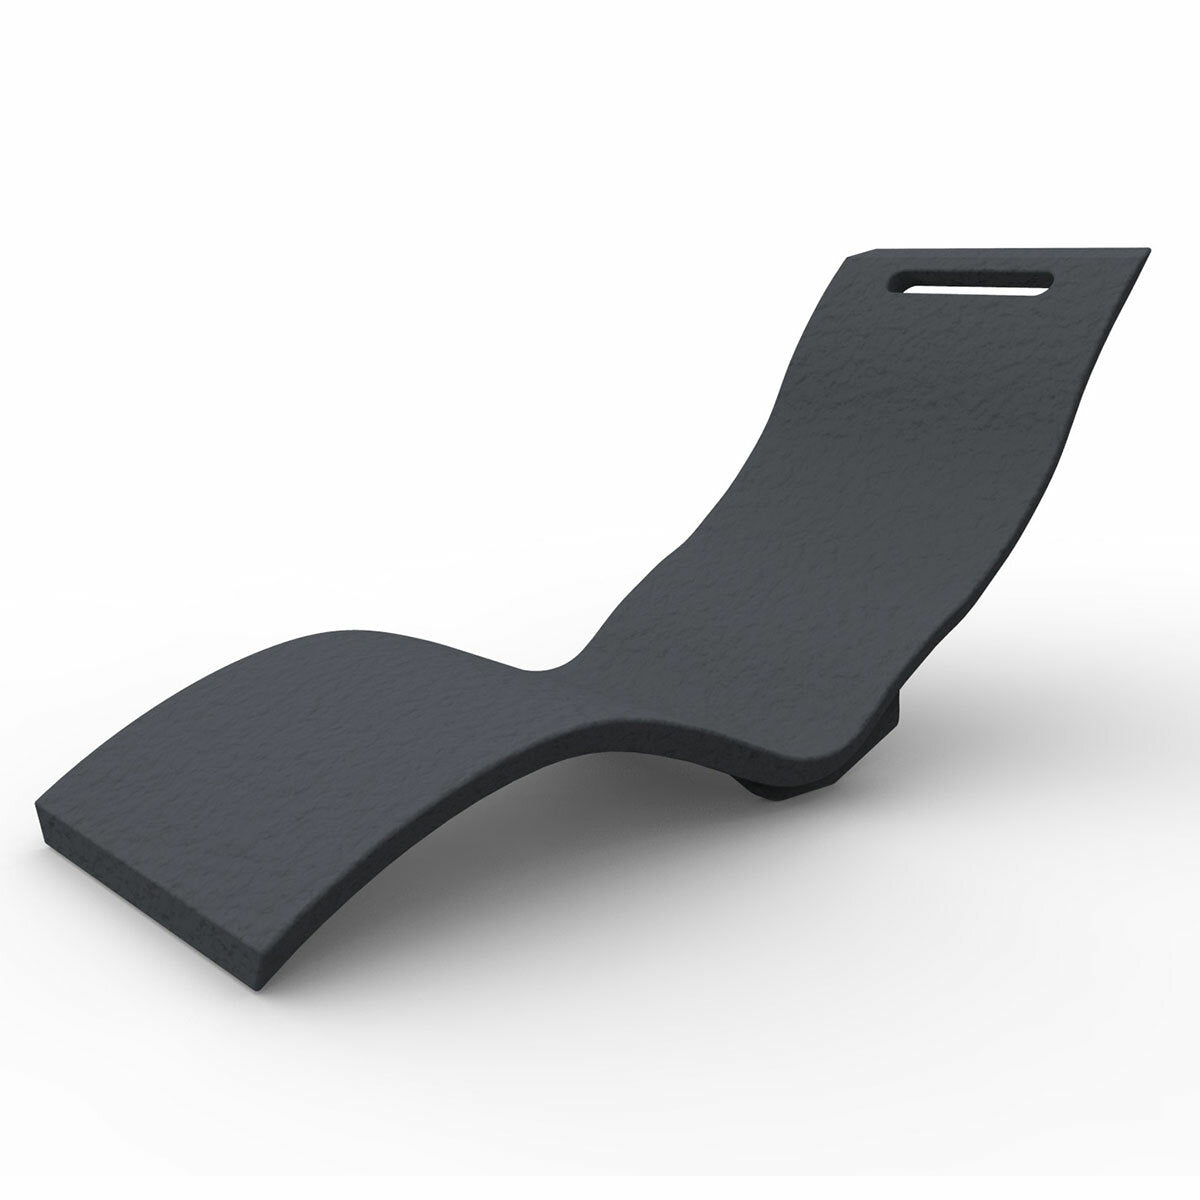 Arkema Serendipity Chaise sun lounger in HD polyethylene in anthracite color